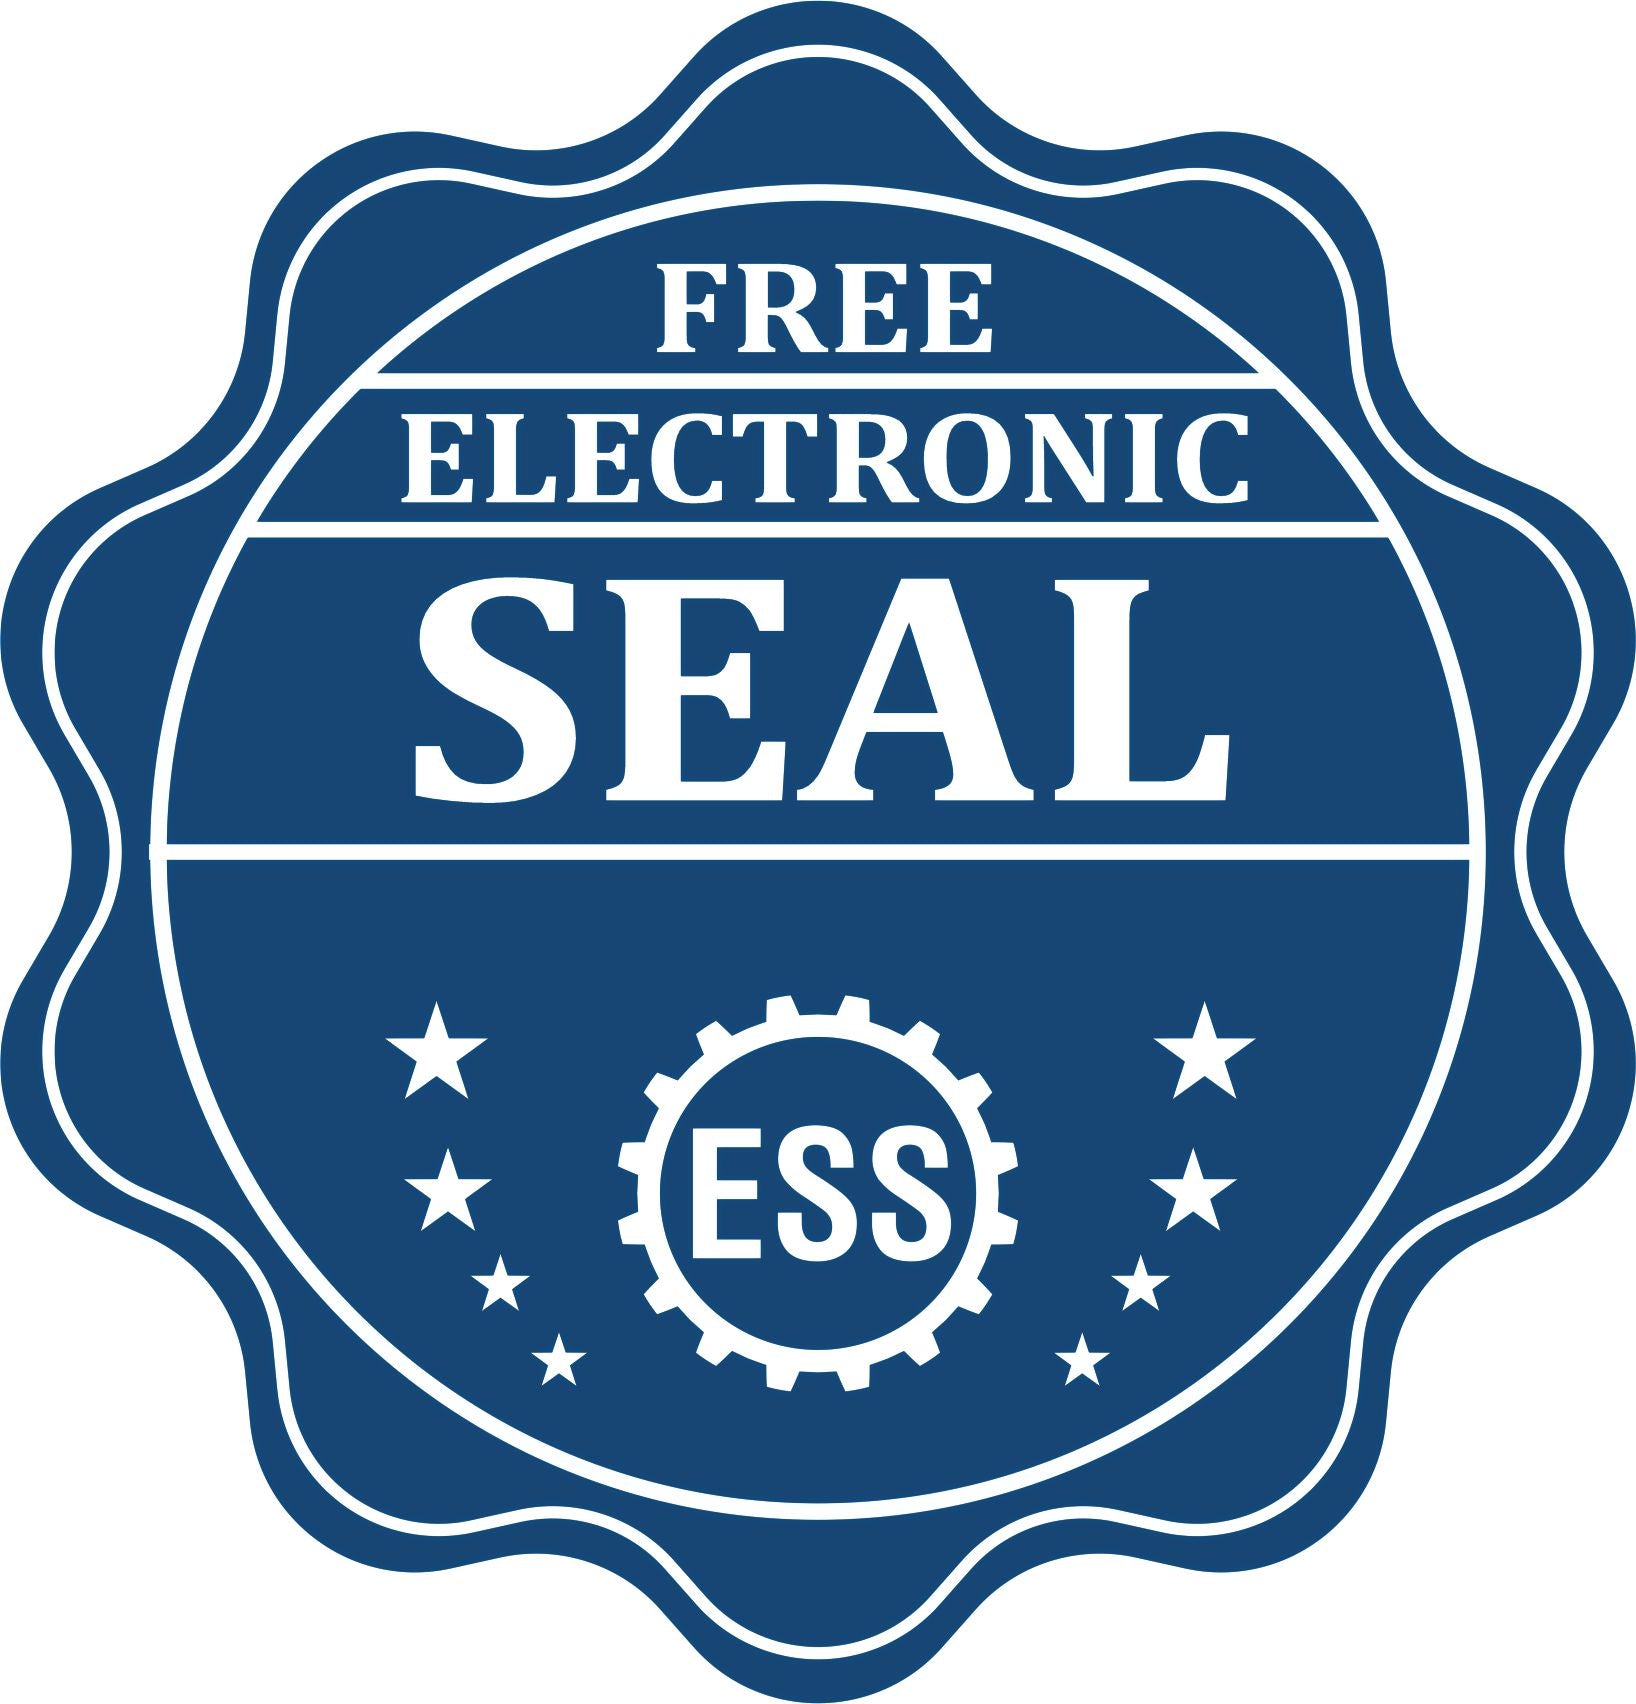 A badge showing a free electronic seal for the PSI Washington Notary Stamp with stars and the ESS gear on the emblem.